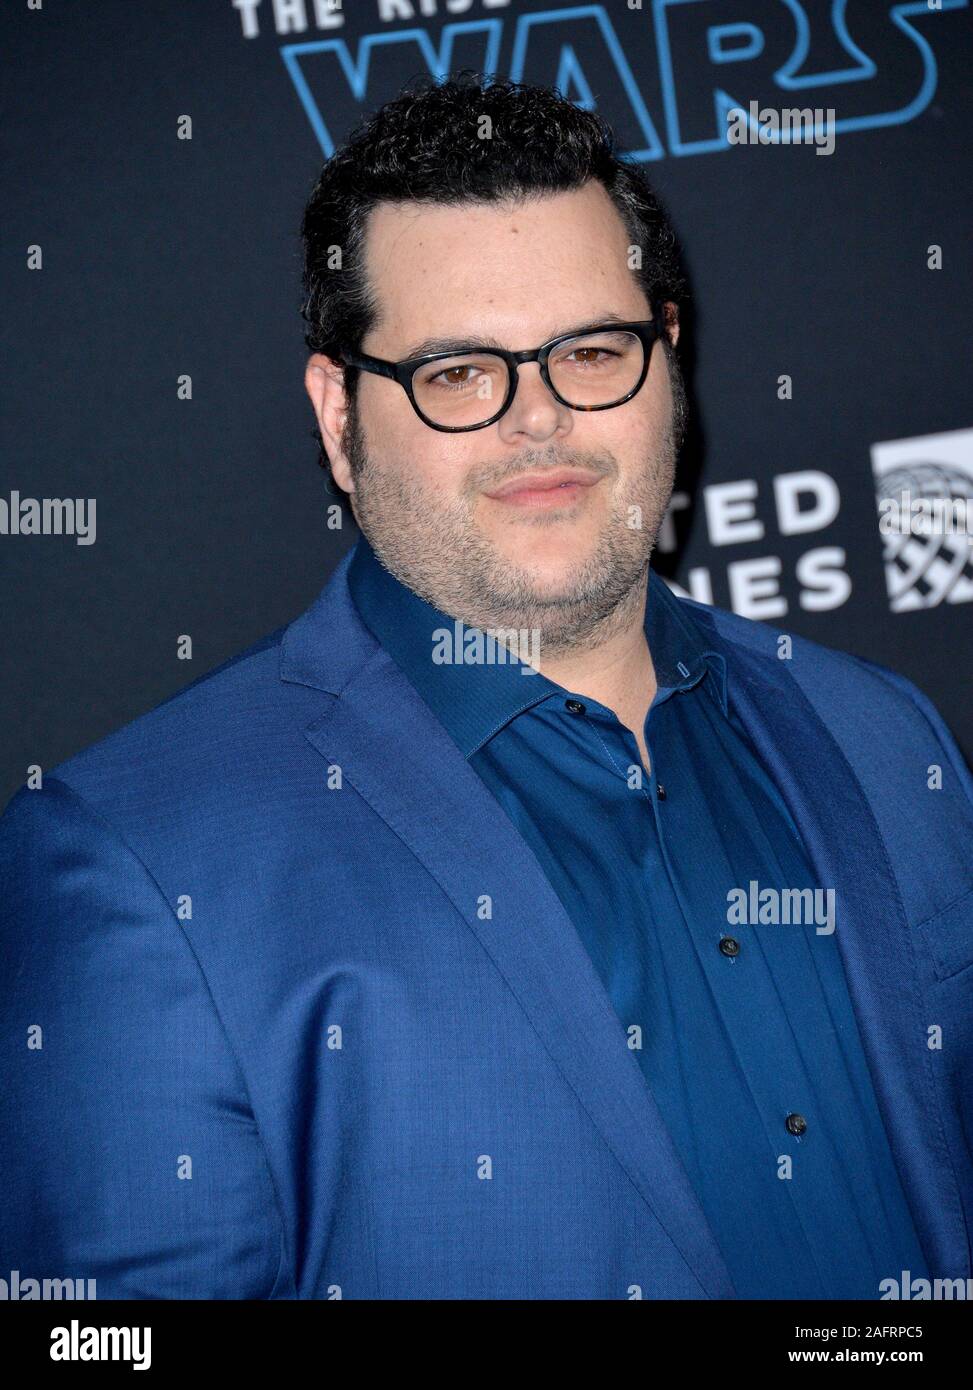 Los Angeles, USA. 16th Dec, 2019. LOS ANGELES, USA. December 16, 2019: Josh Gad at the world premiere of 'Star Wars: The Rise of Skywalker' at the El Capitan Theatre. Picture Credit: Paul Smith/Alamy Live News Stock Photo